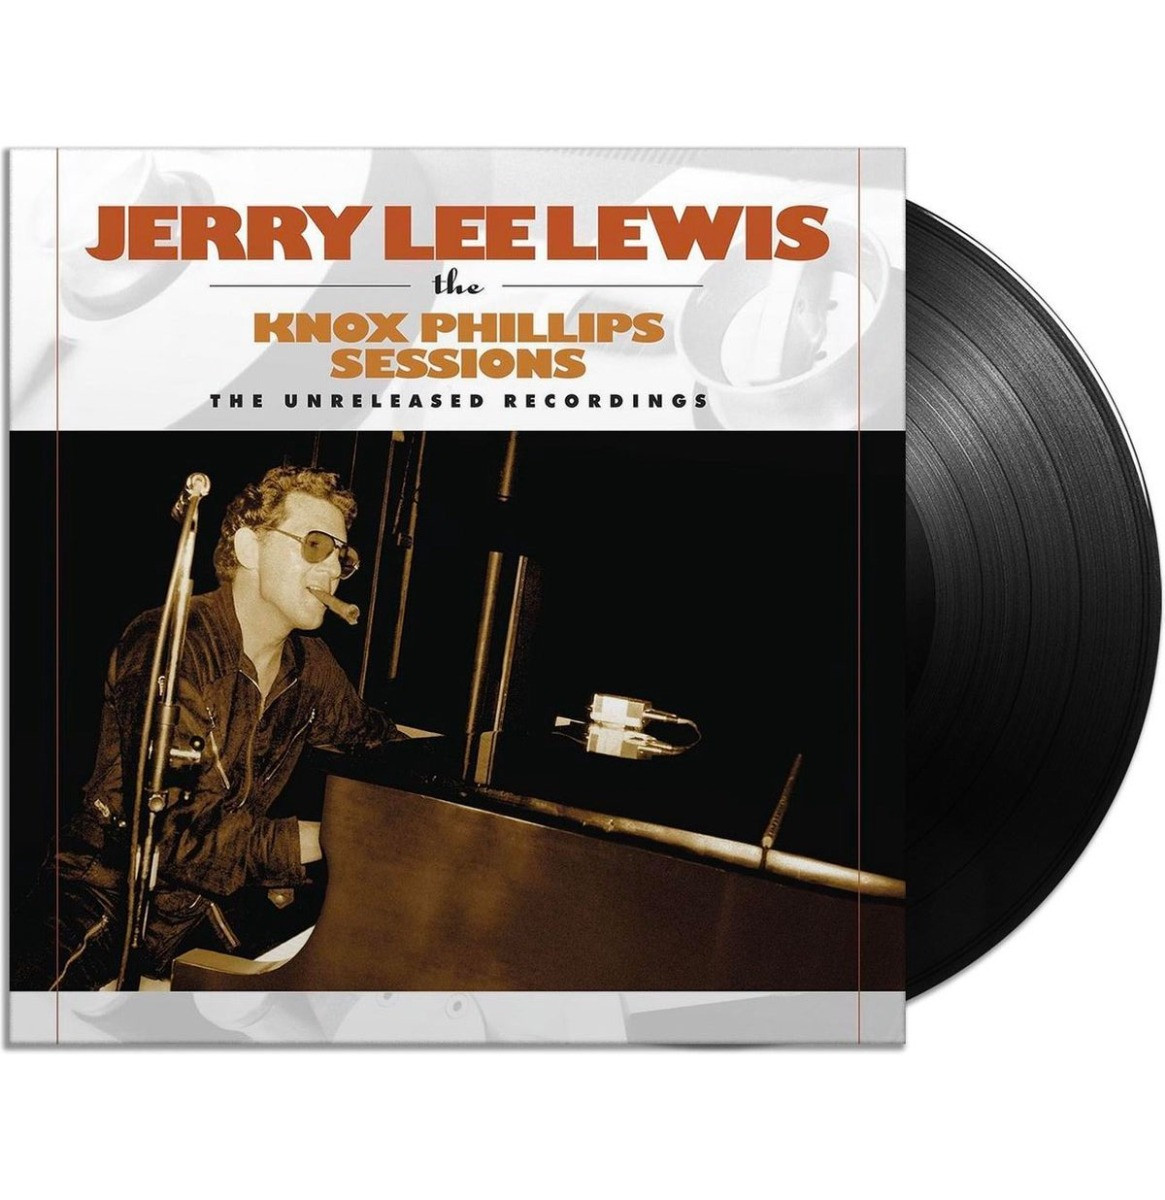 Jerry Lee Lewis - The Knox Phillips Sessions - The Unreleased Recordings LP